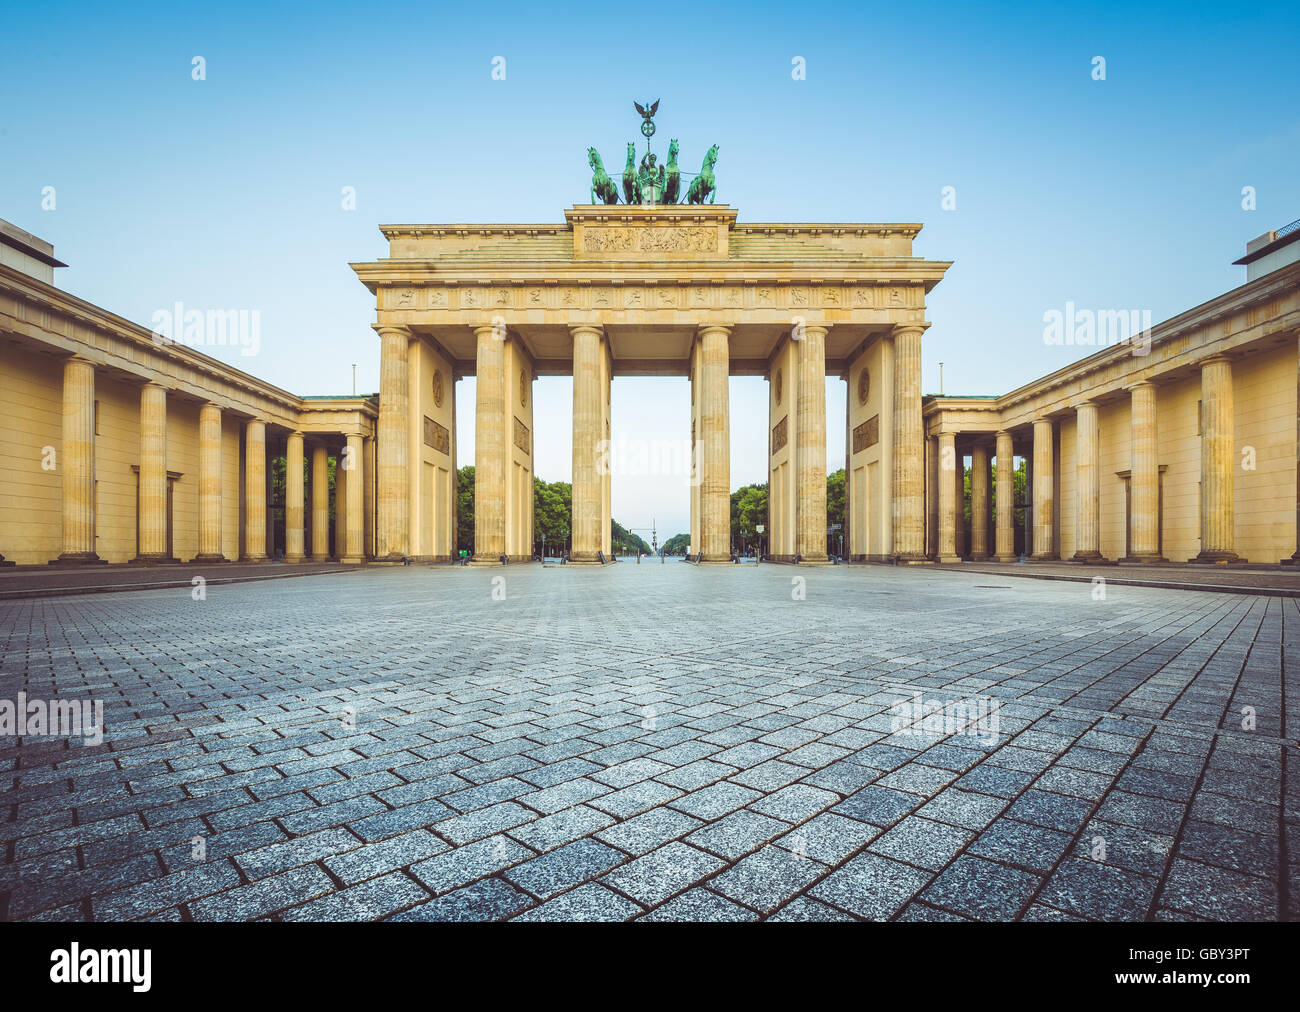 Classic view of famous Brandenburg Gate at sunrise with retro vintage filter effect, central Berlin, Germany Stock Photo